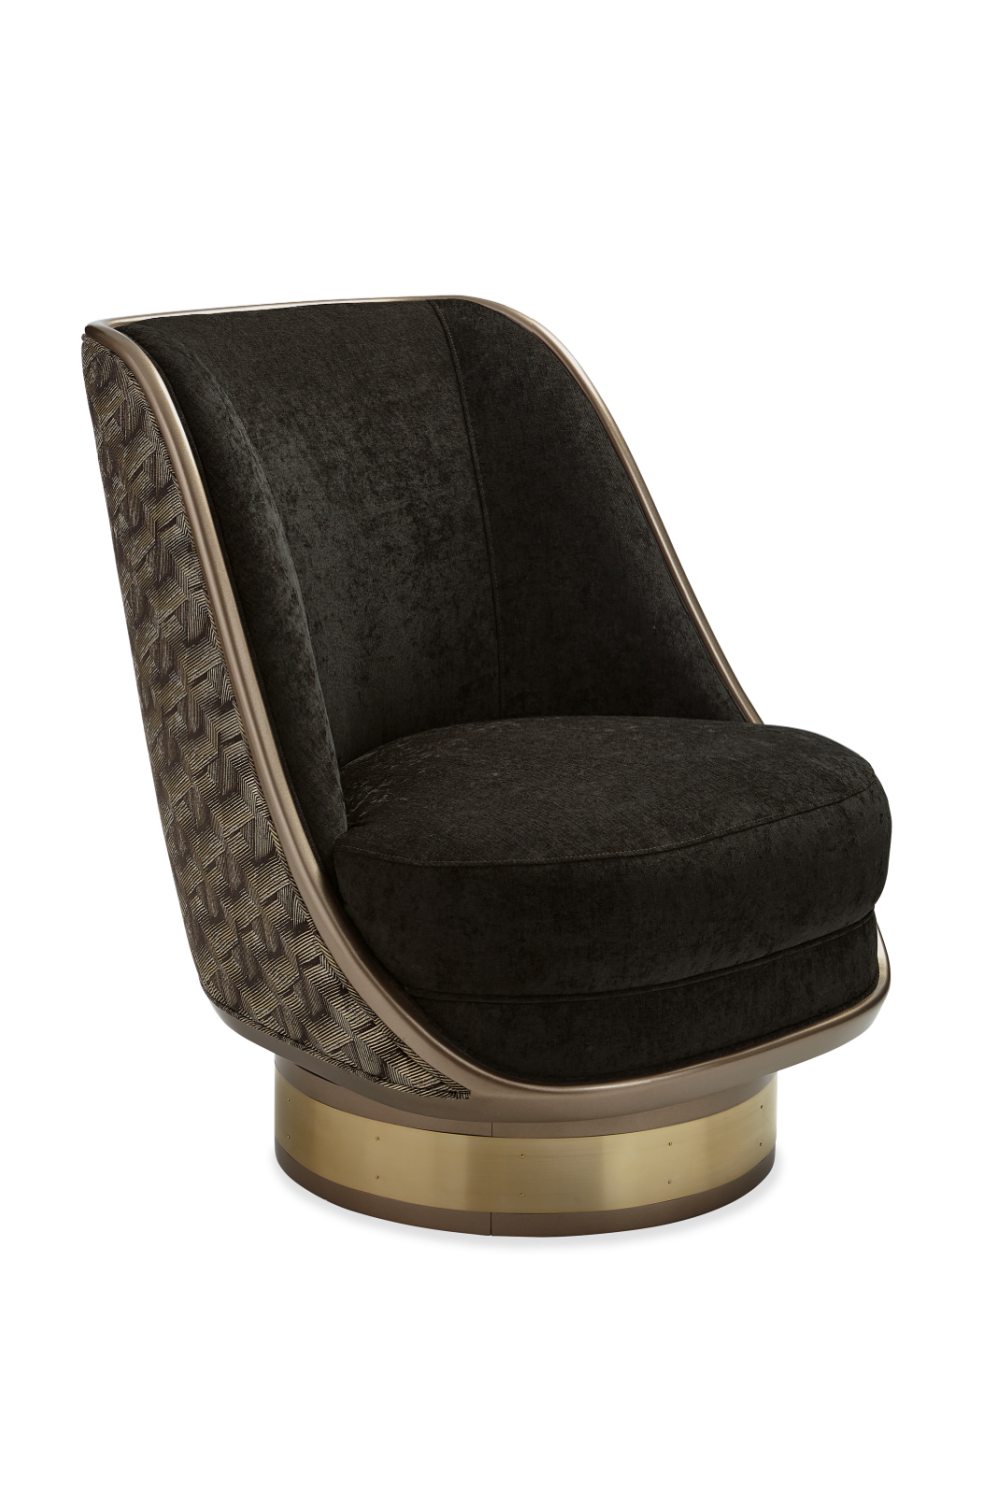 Brown Chenille Swivel Chair | Caracole Go For A Spin | Oroa.com